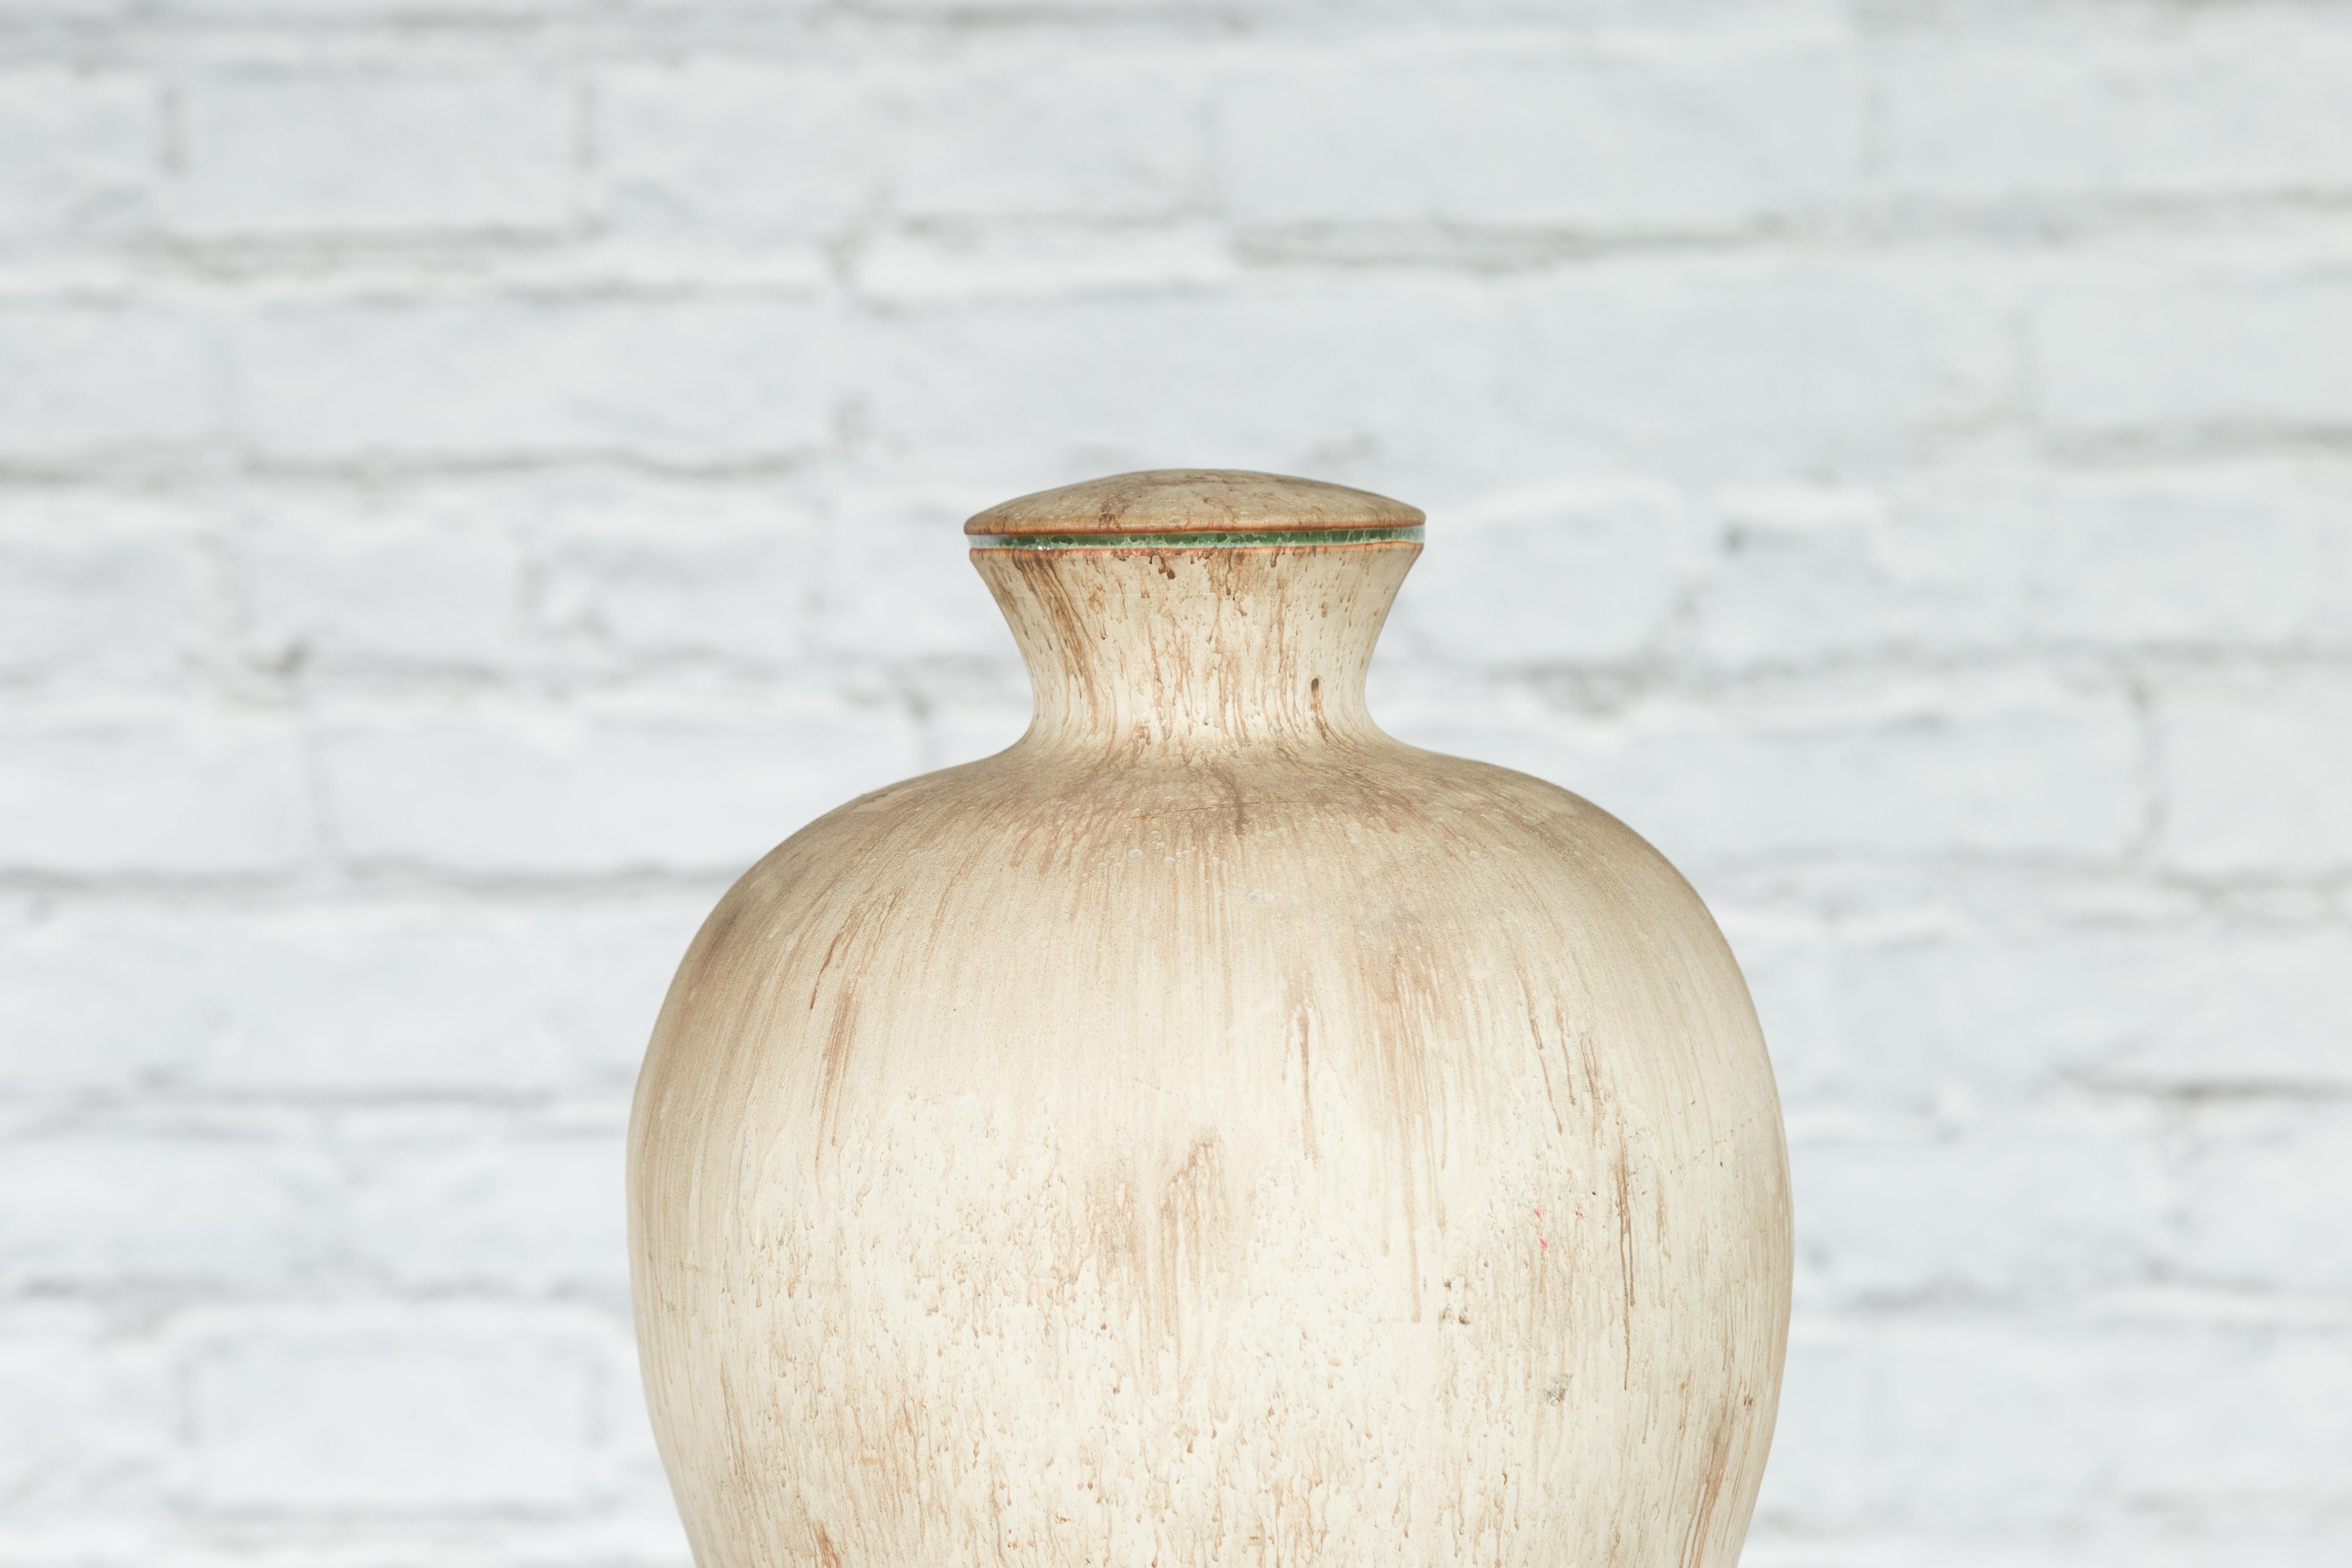 Thai Vintage Artisan Prem Collection Ceramic Vase Pre Drilled To be Made into a Lamp For Sale